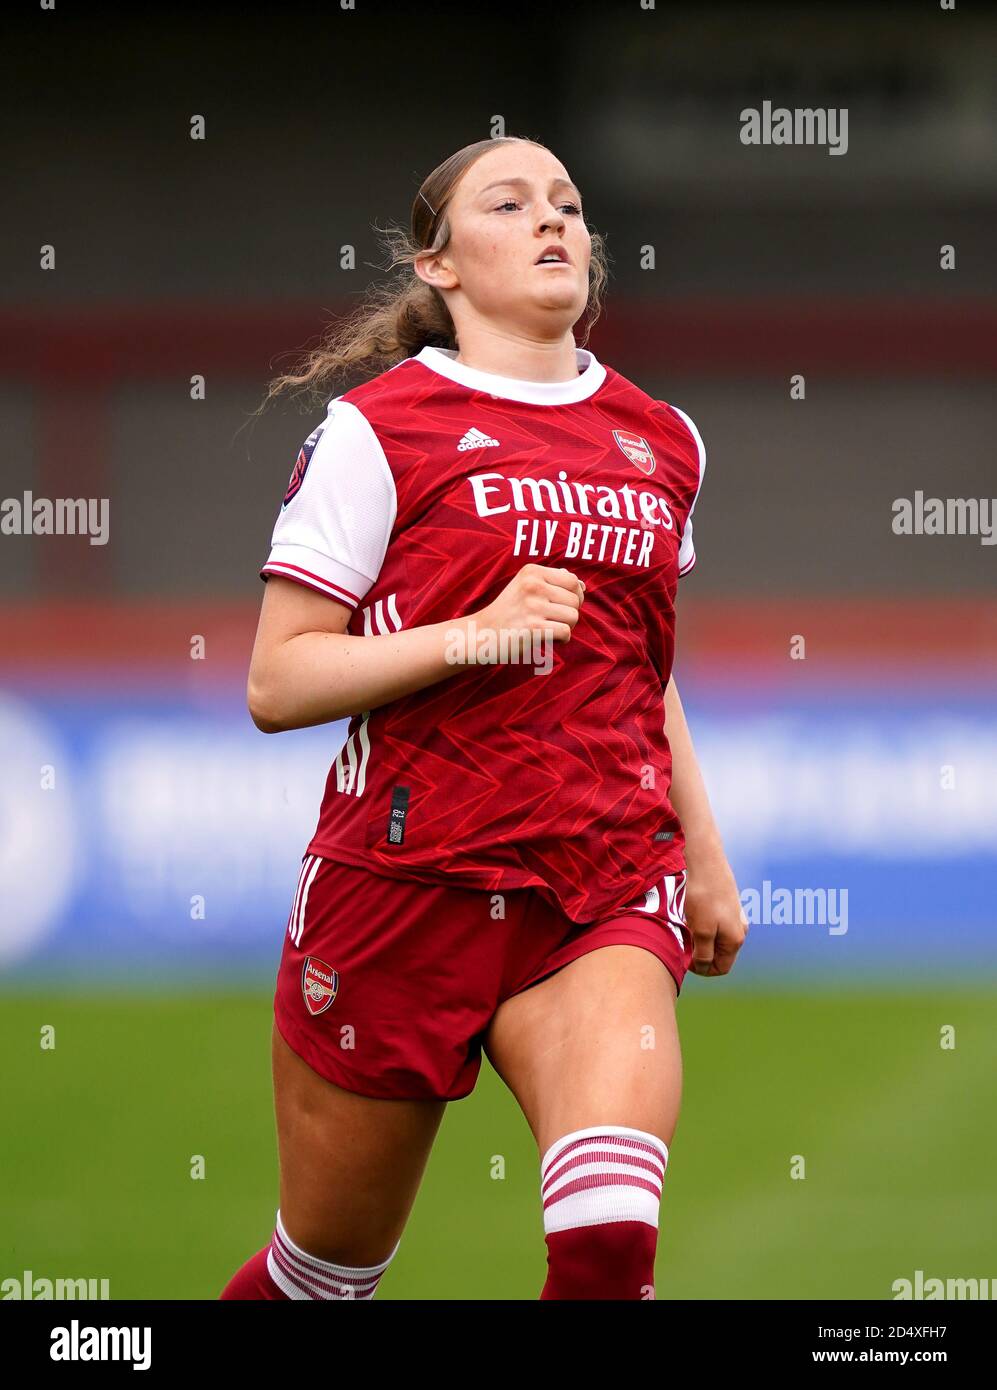 Arsenal S Ruby Mace During The Fa Women S Super League Match At The Broadfield Stadium Brighton Stock Photo Alamy